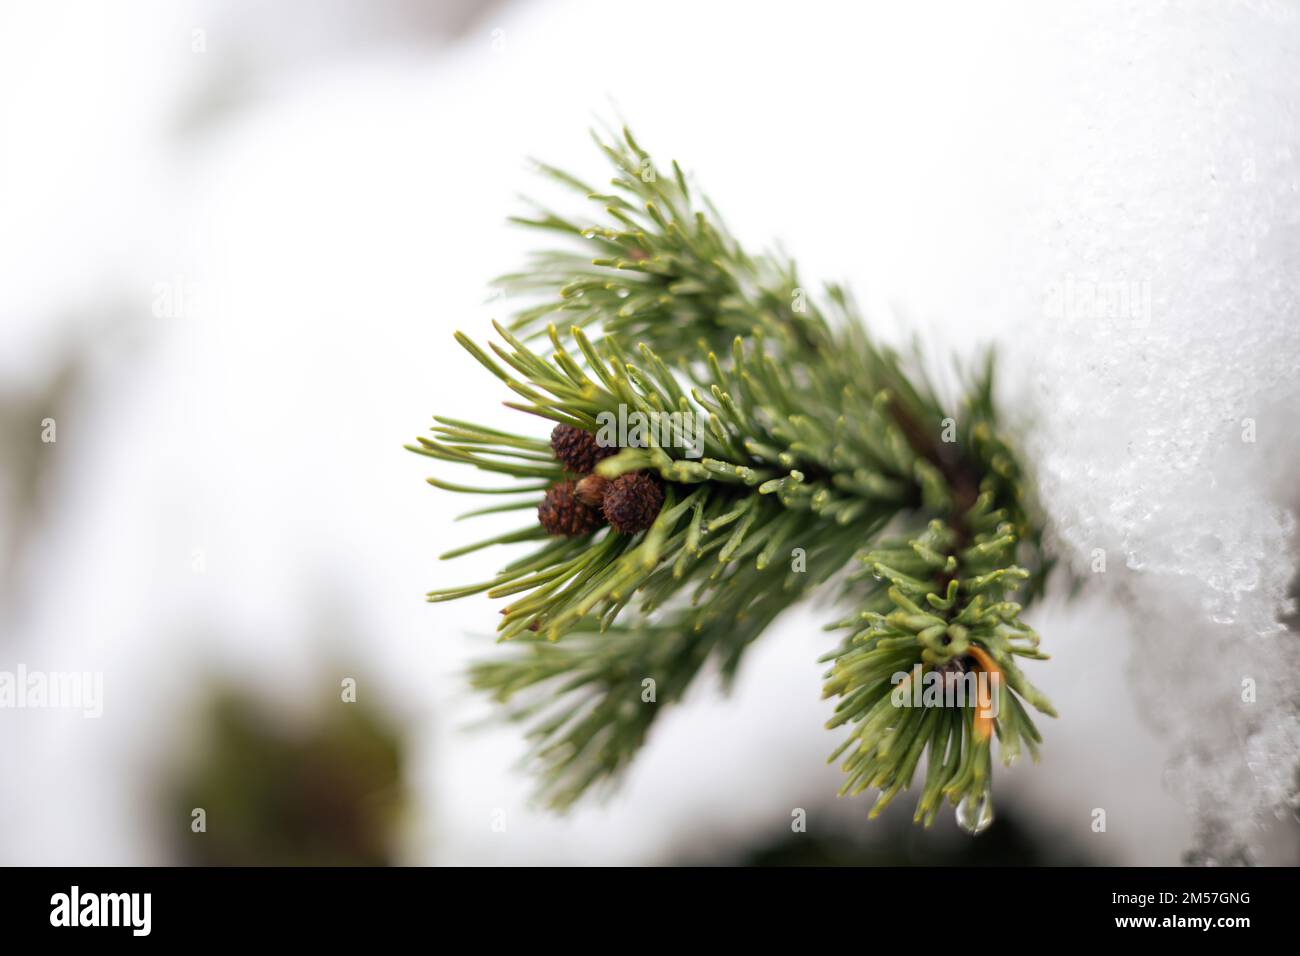 A closeup shot of green Swiss mountain pine needles during winter season with blur background Stock Photo